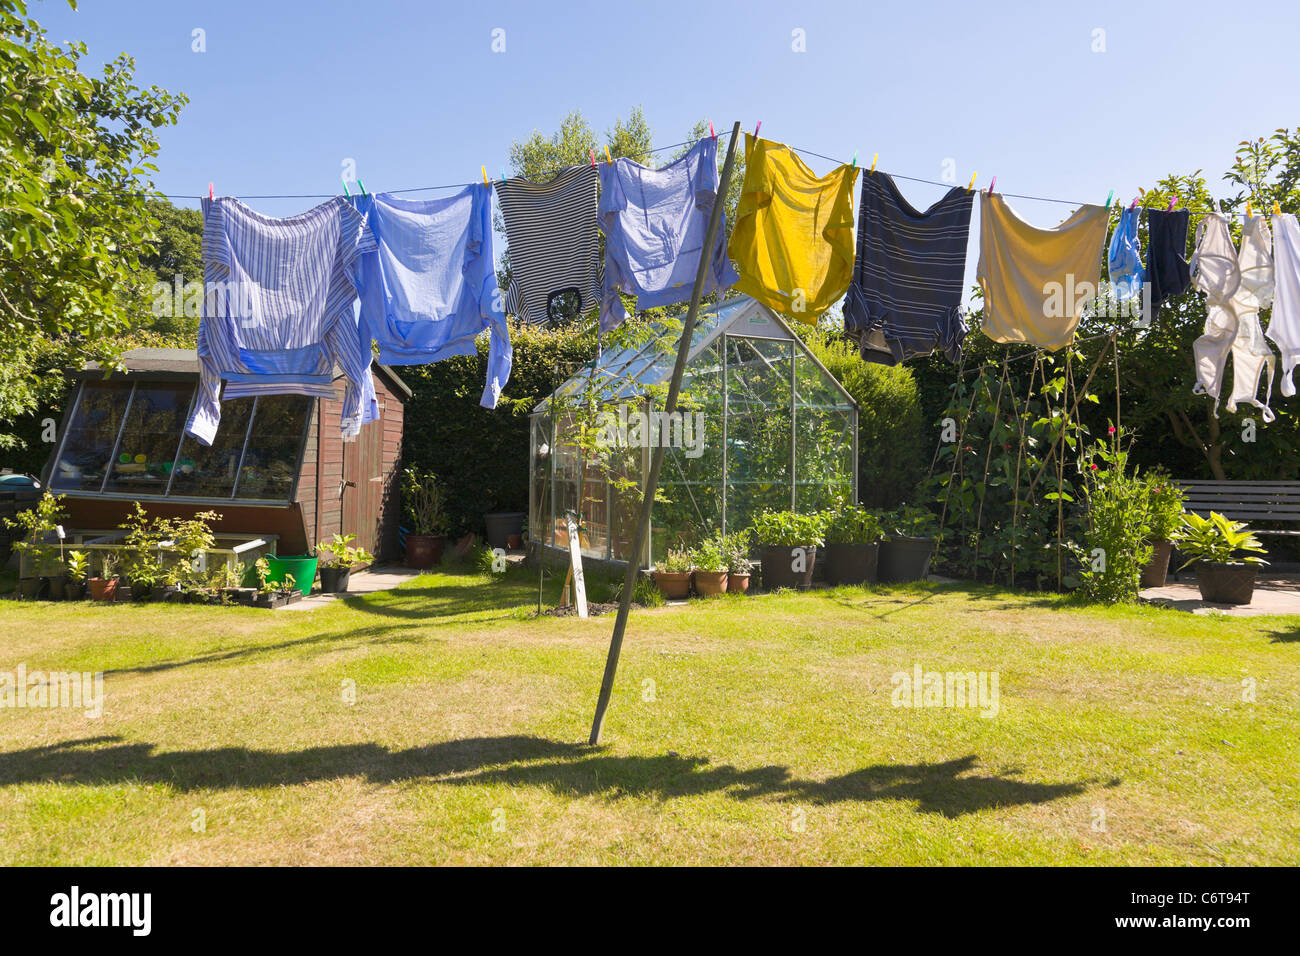 Washing hanging on clothes line Stock Photo